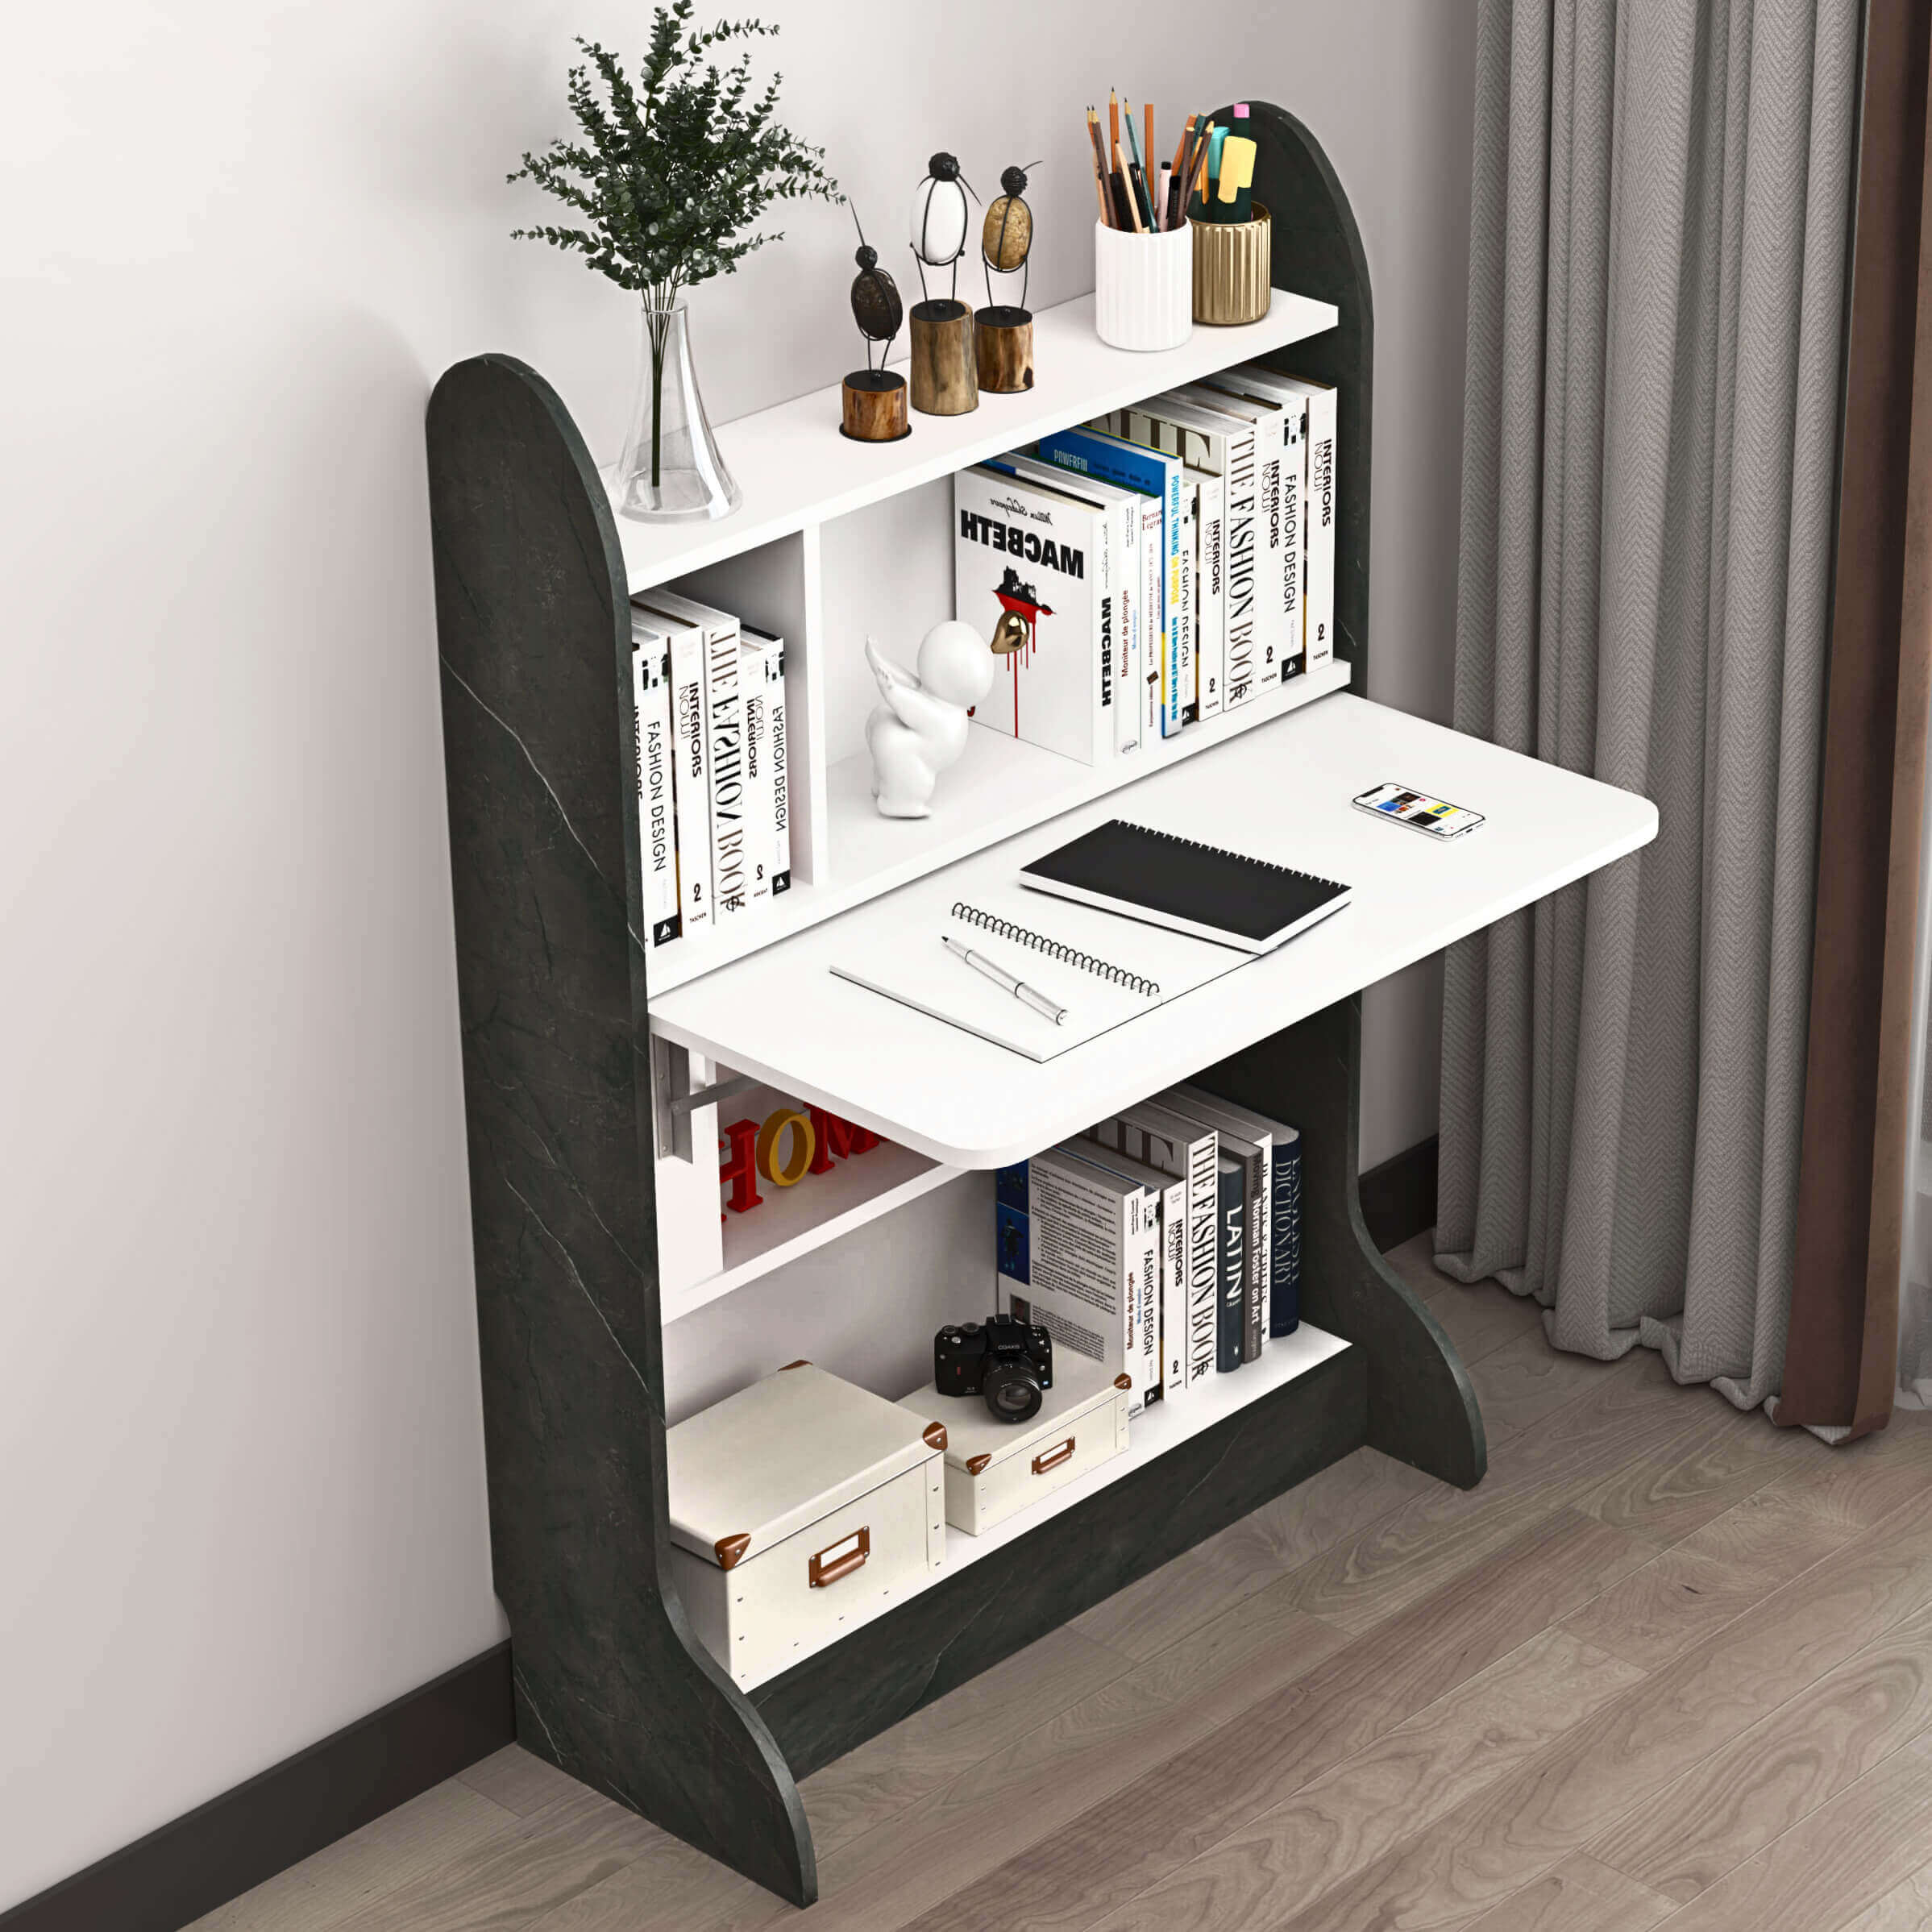 Plywood Wall Mountable Desk with Fold Up Table & Storage Shelves #table_flip down